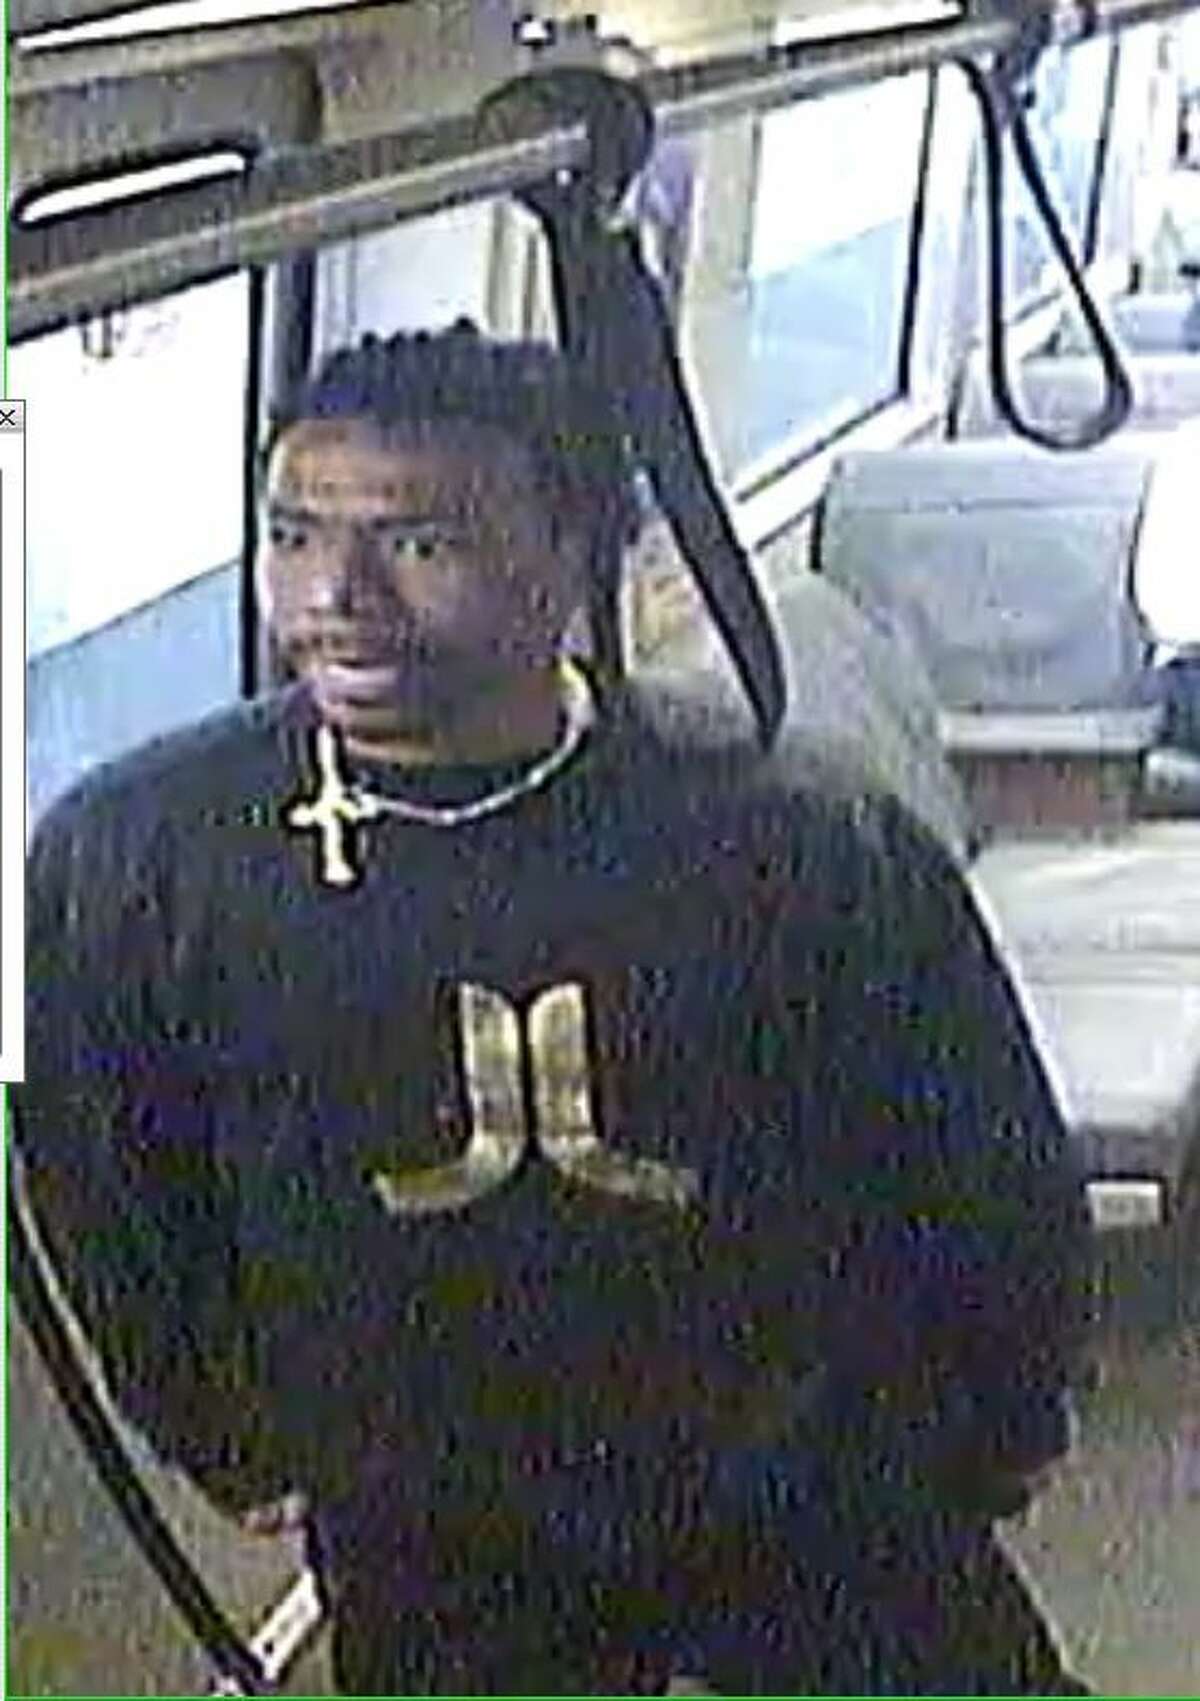 BART police released images and are searching for a suspect wanted in connection with an assault that took place onboard a Richmond-bound train at the MacArthur Station on Friday, August 3, 2018 at approximately 7:50pm.